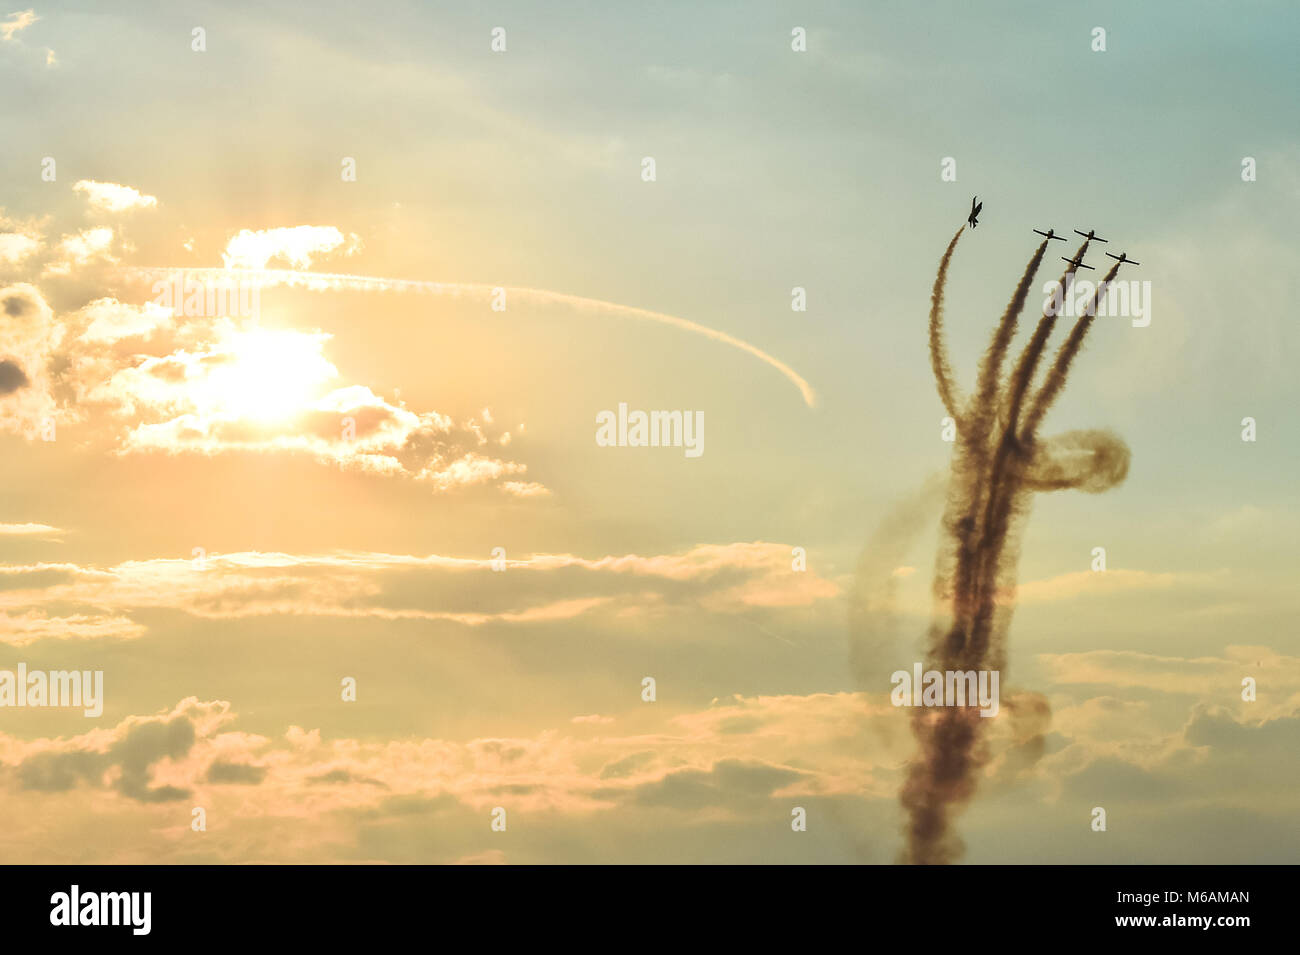 Acrobatic planes doing acrobatics at an Airshow flying at sunset / dusk Stock Photo